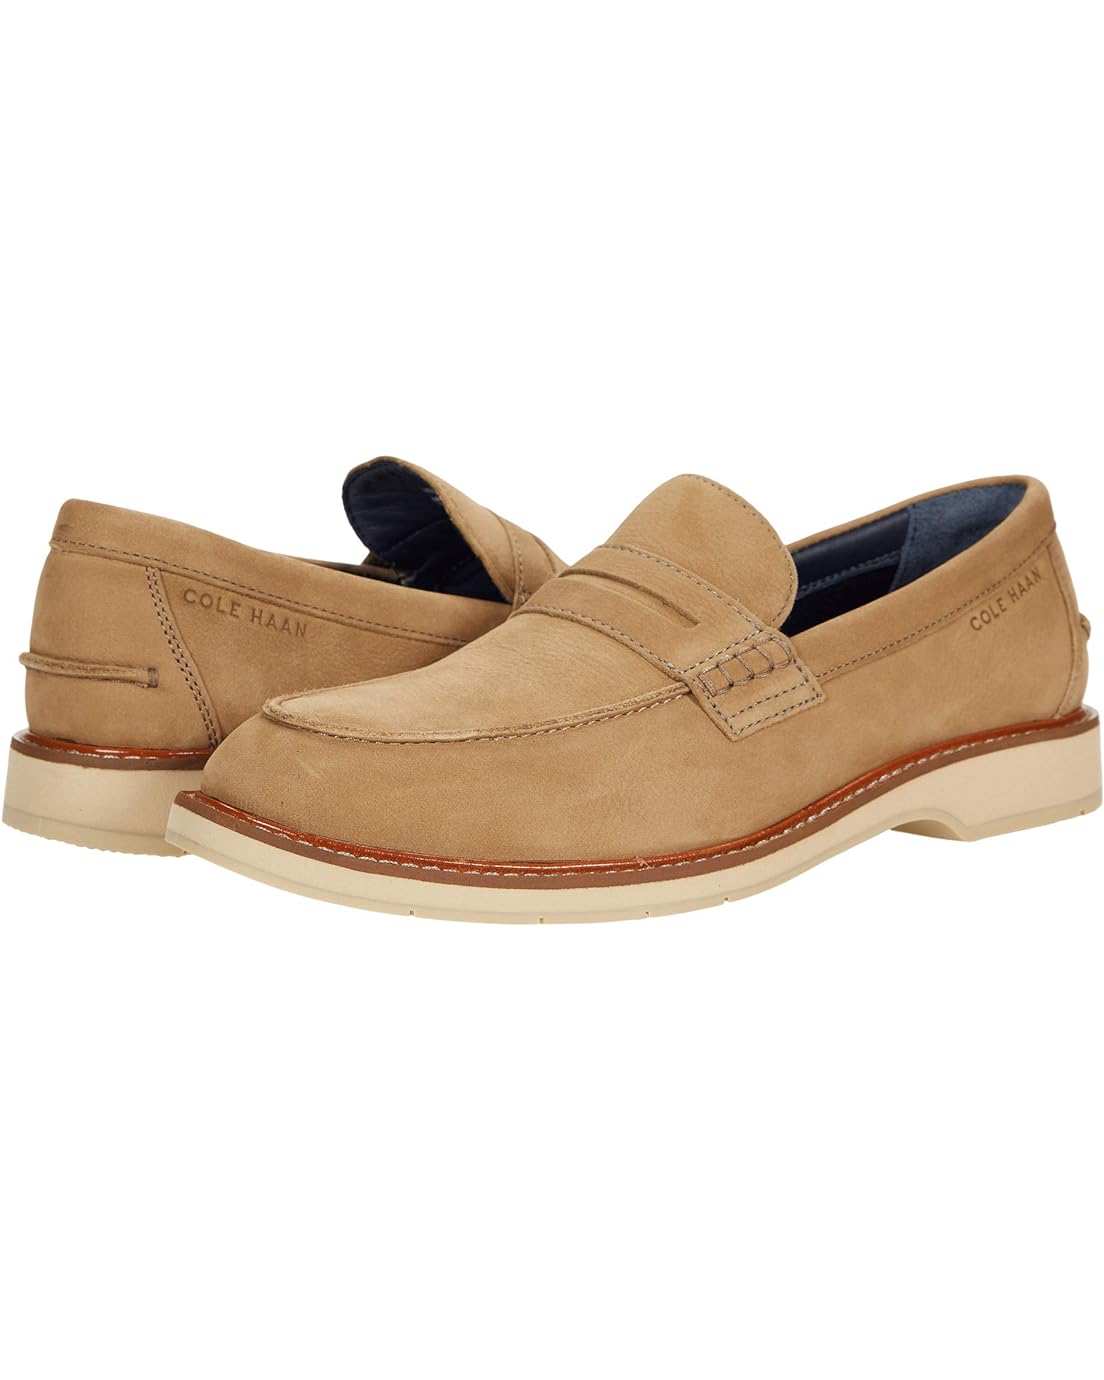 Cole Haan Morris Penny Loafer